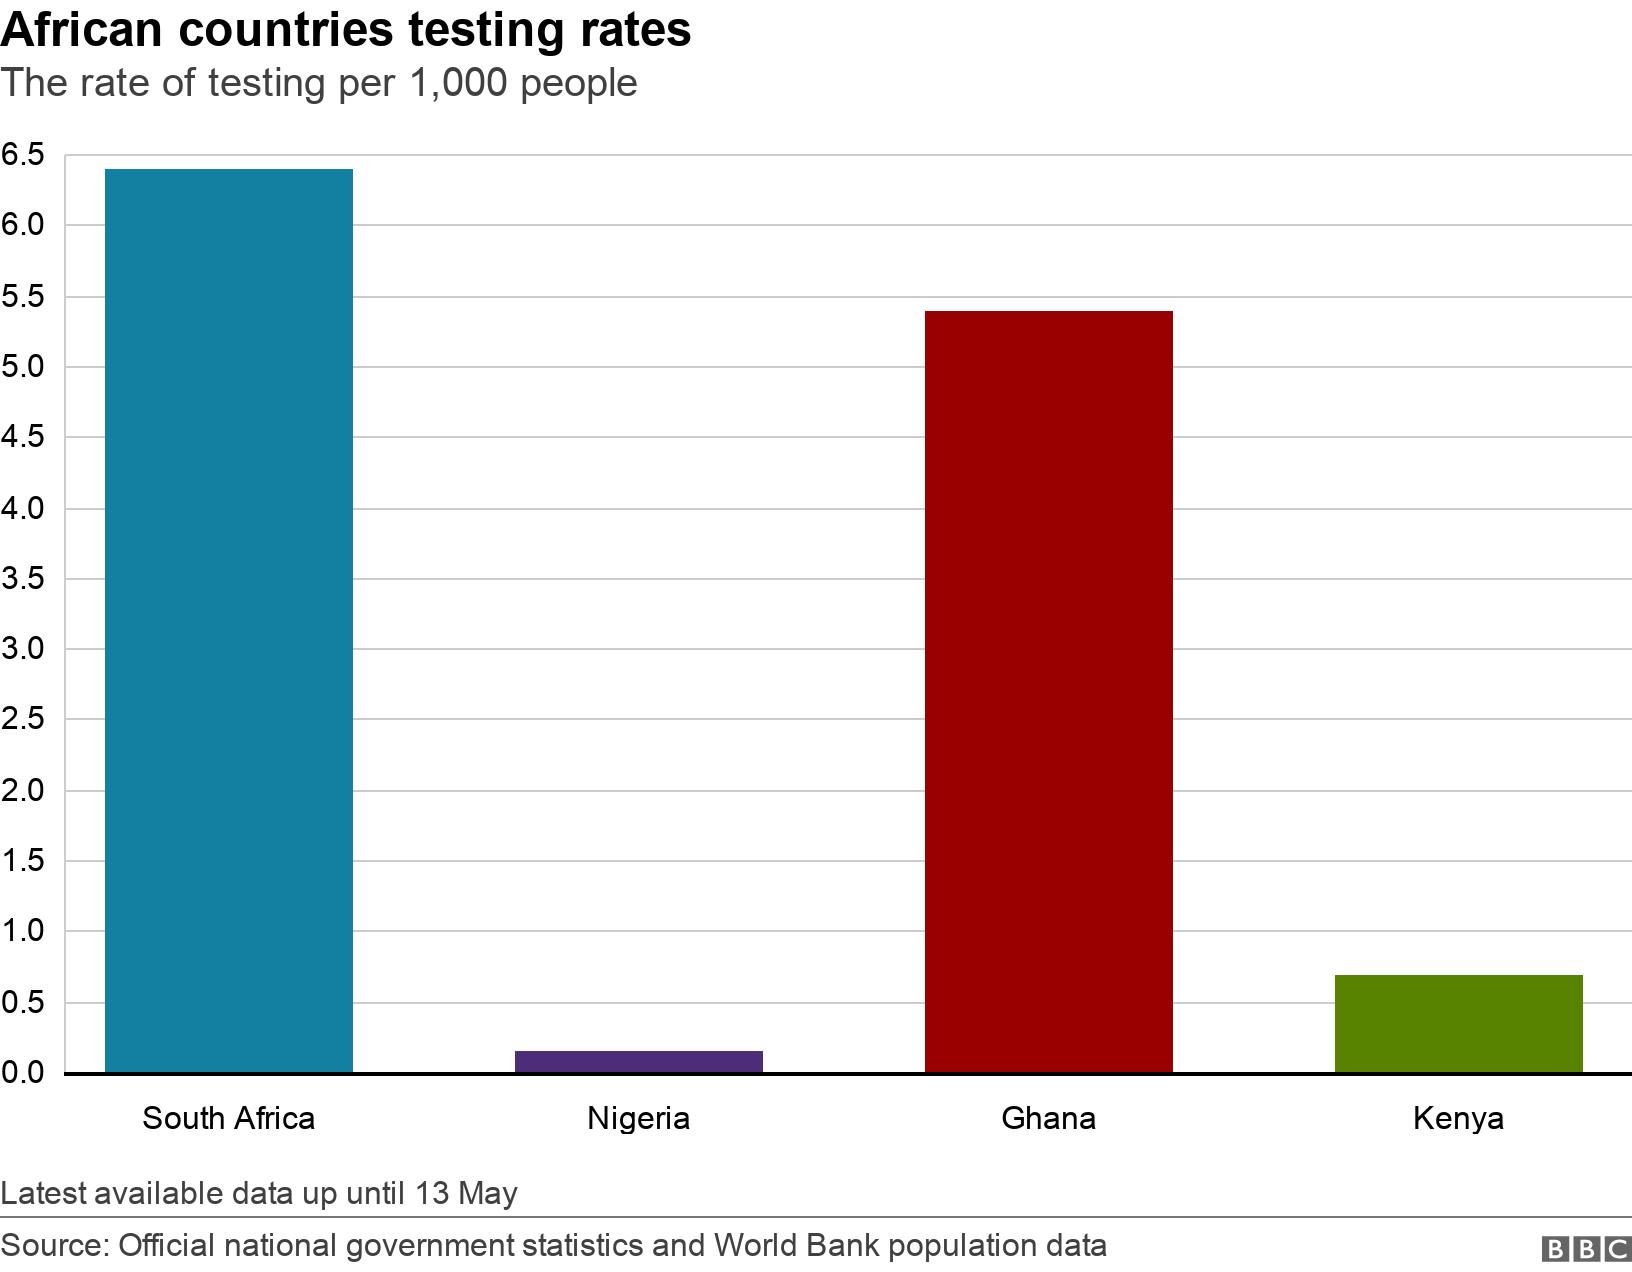 African countries testing rates. The rate of testing per 1,000 people.  Latest available data up until 13 May.